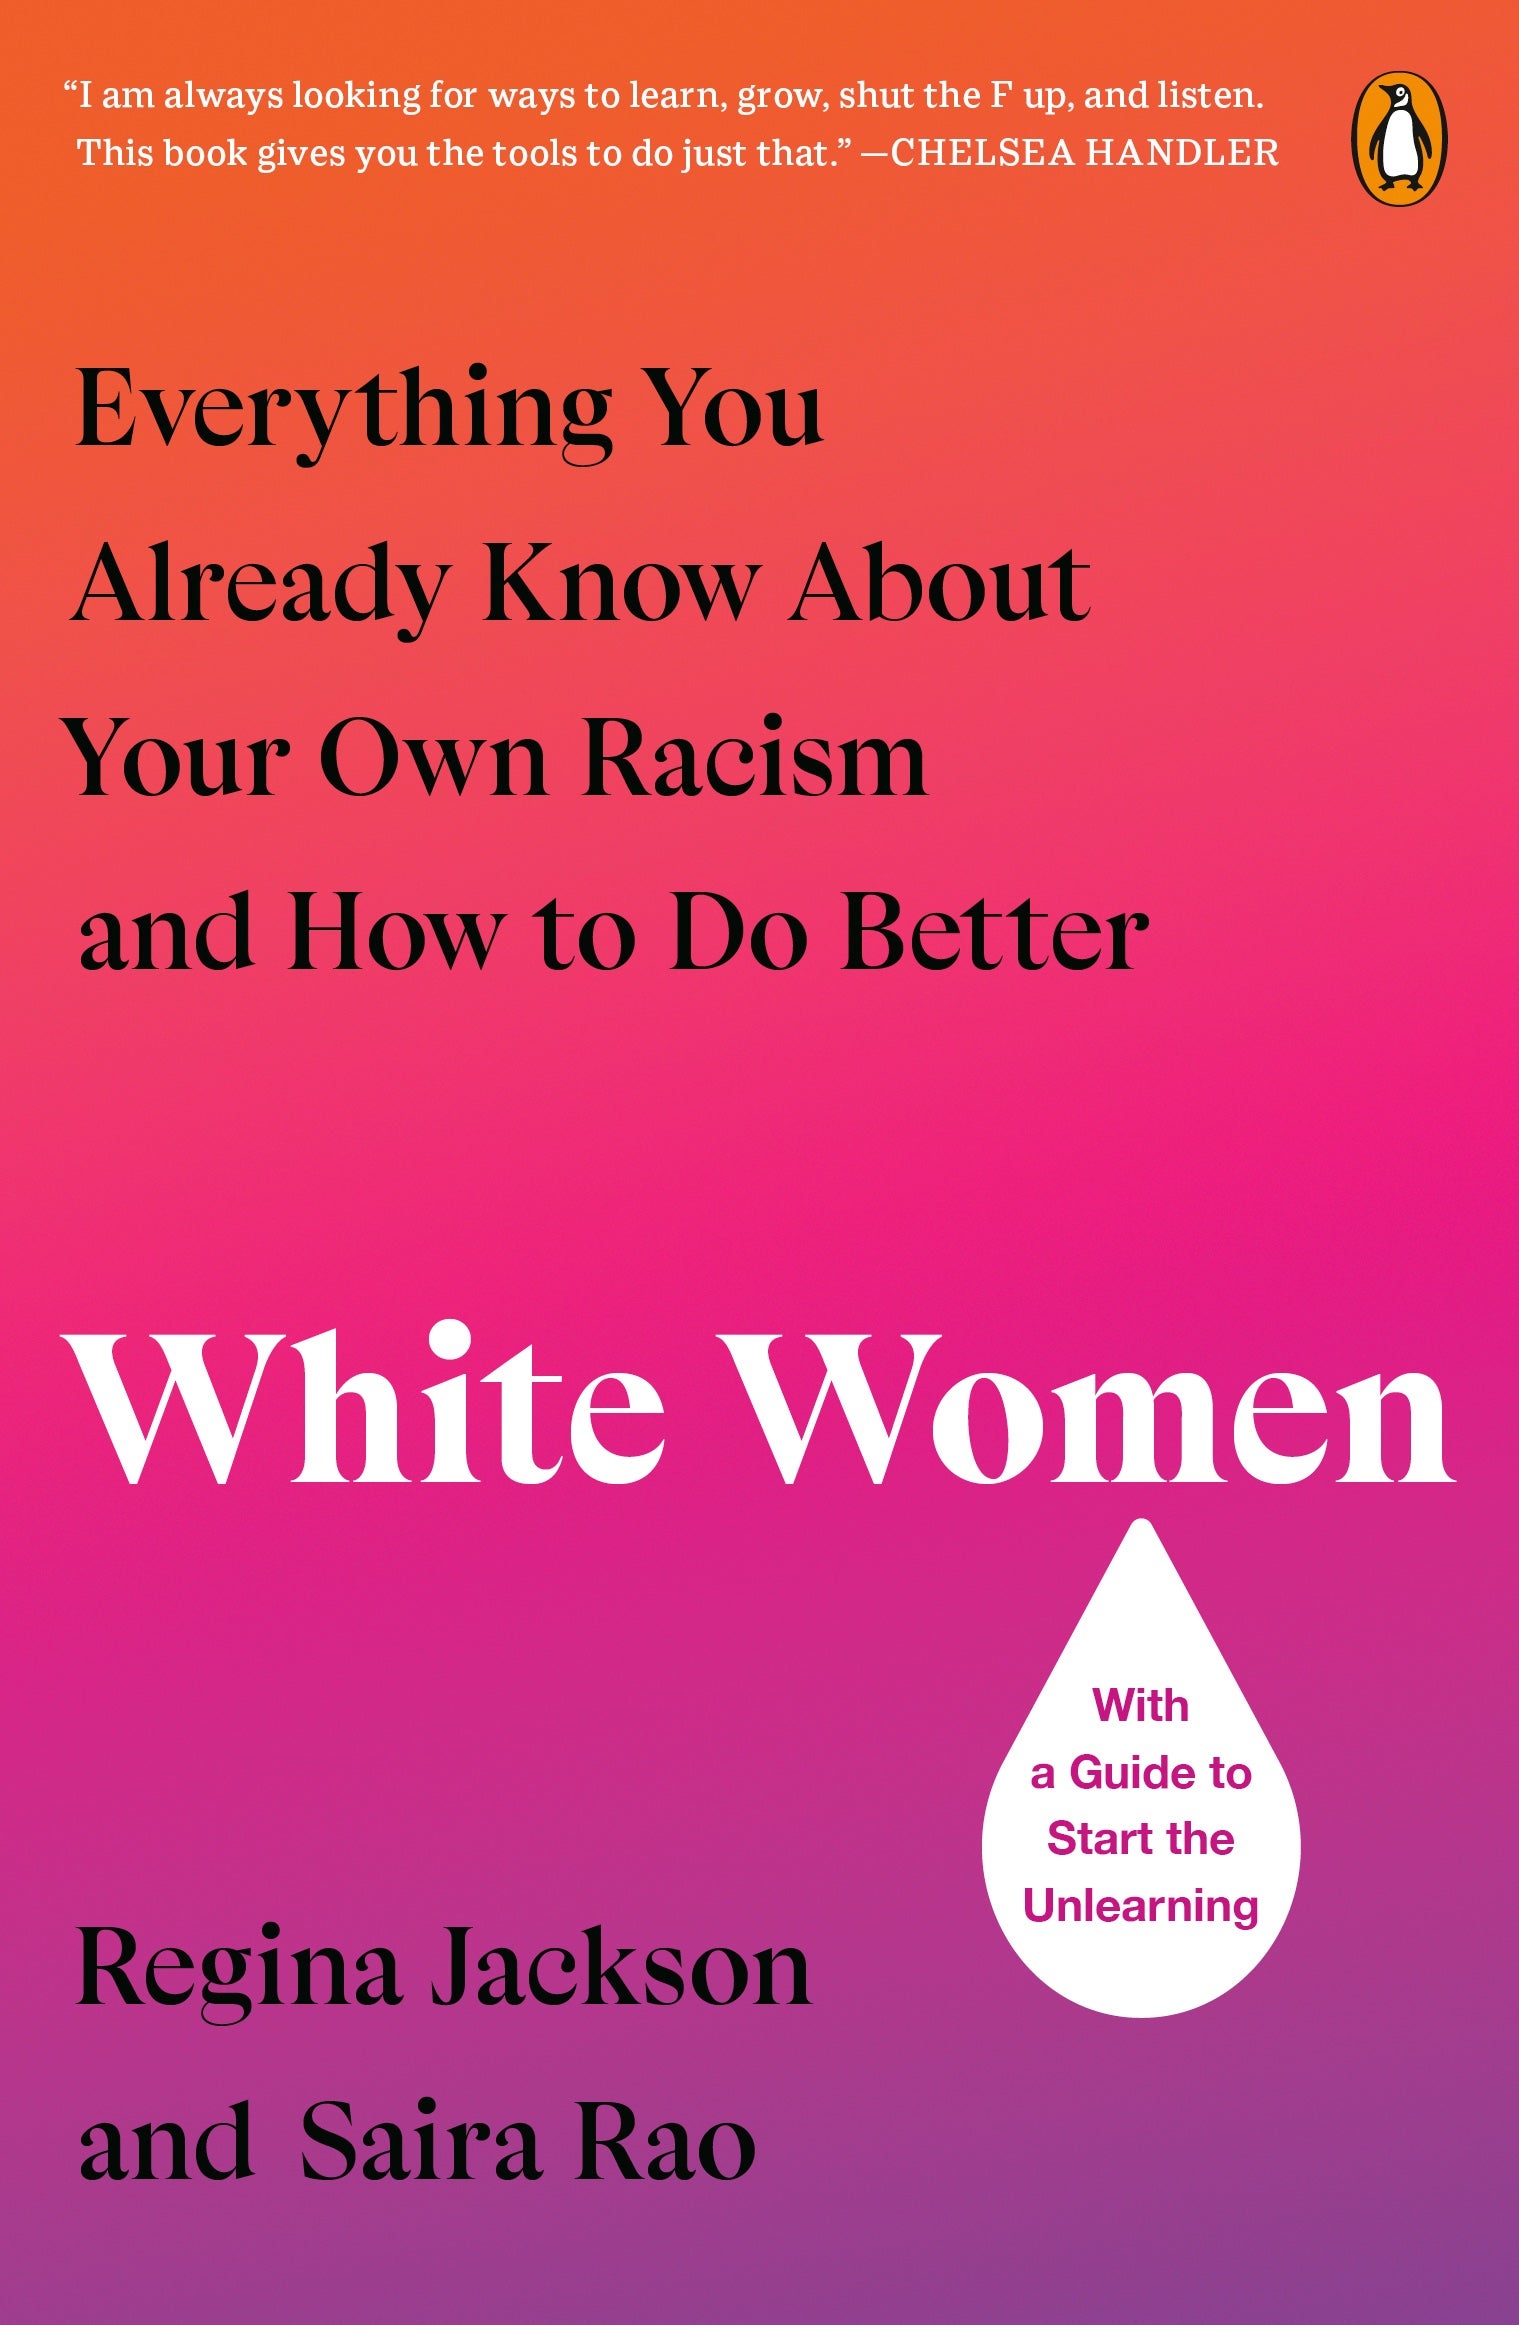 What Black Women Can Take From A Book Detailing White Women’s Racism